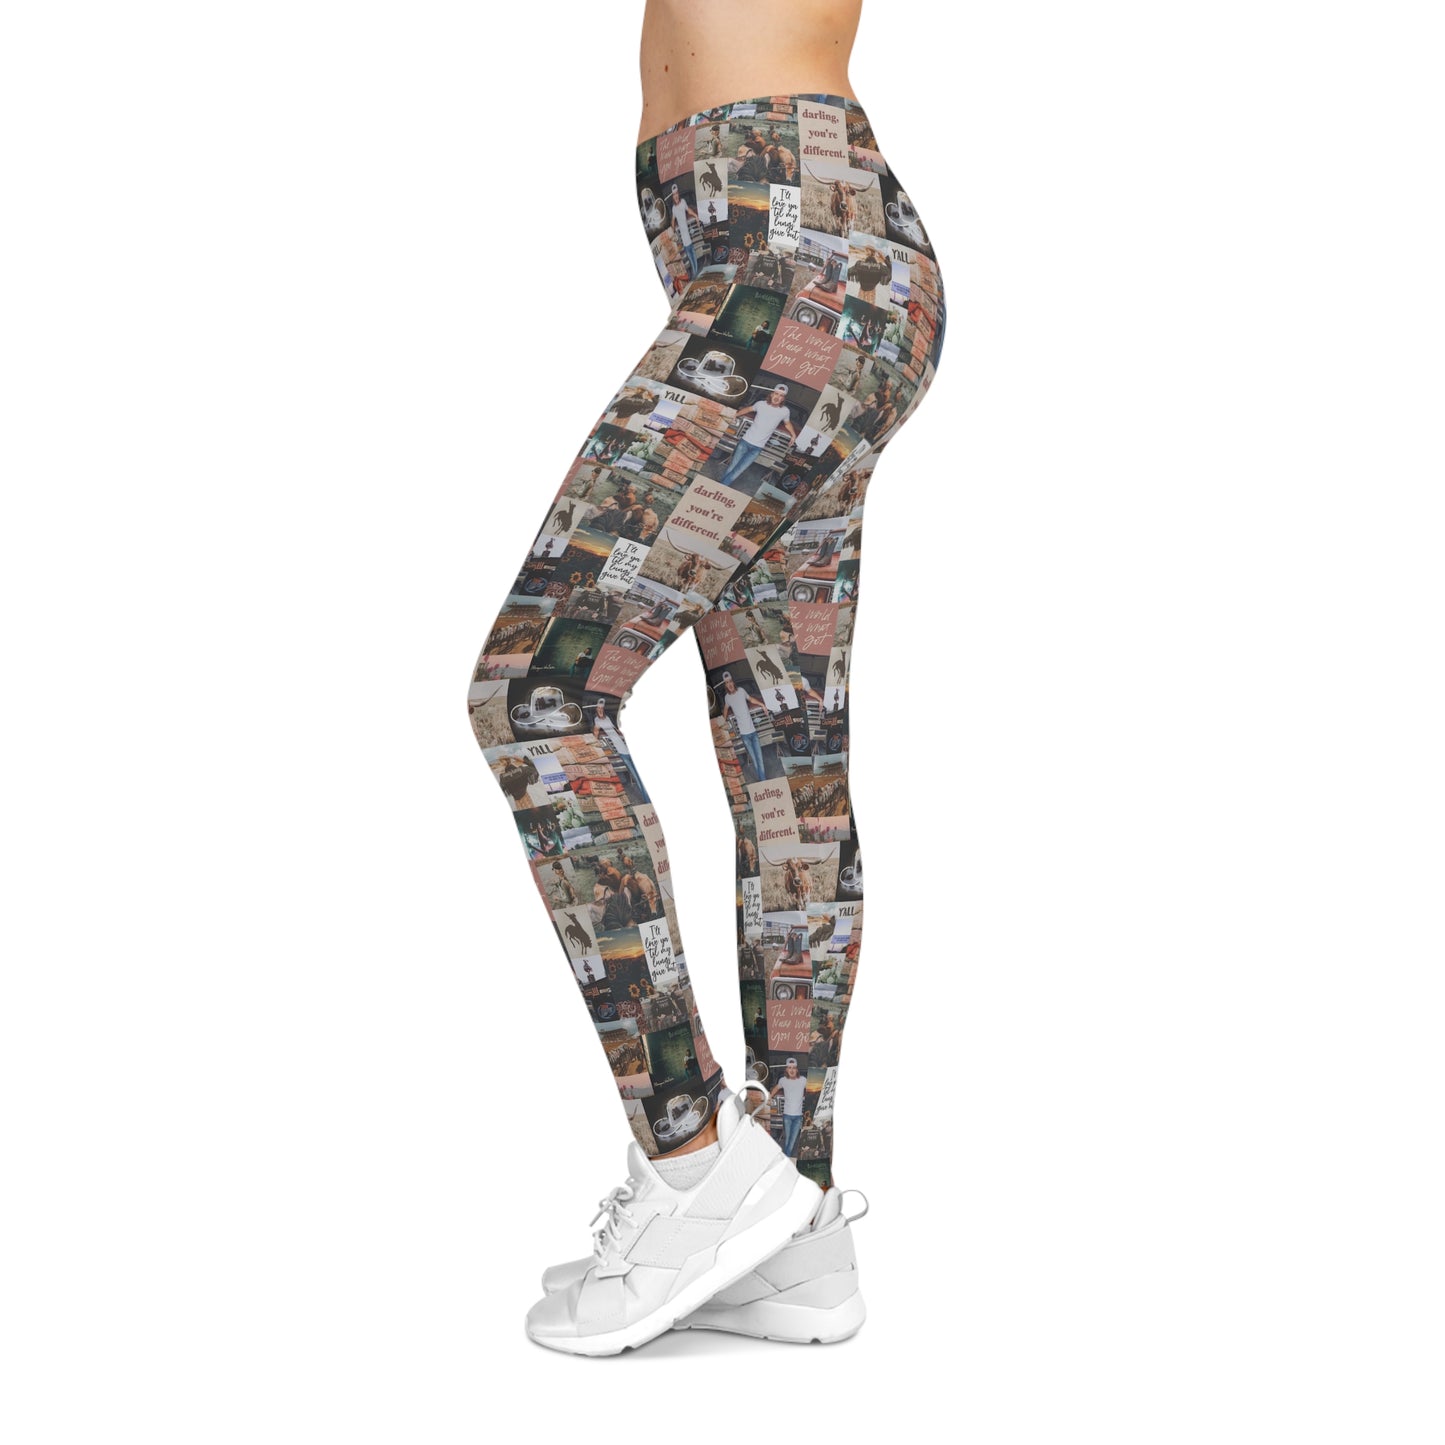 Morgan Wallen Darling You're Different Collage Women's Casual Leggings